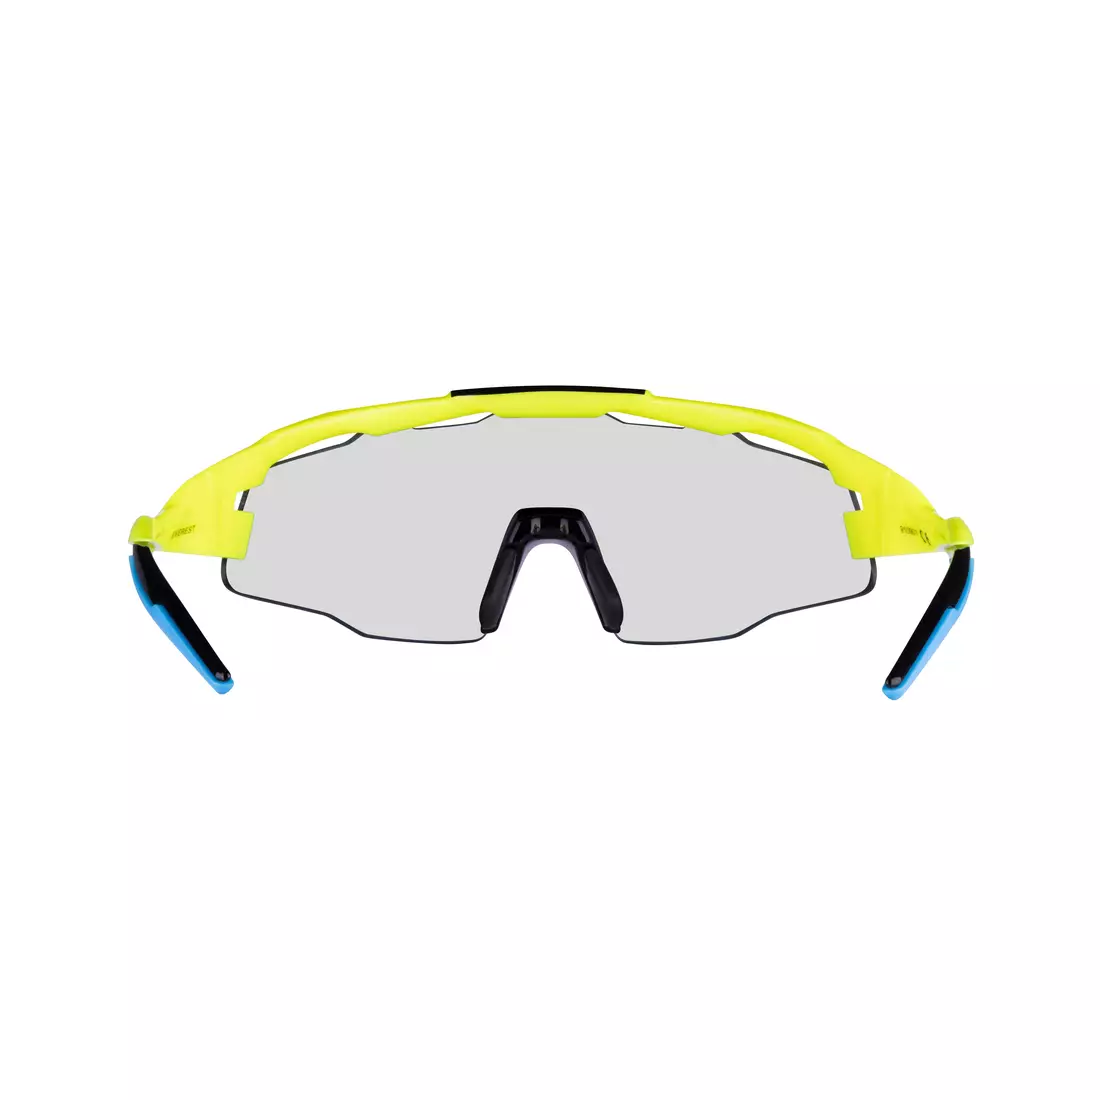 FORCE cycling / sports glasses EVEREST photochromic, fluo, 910902